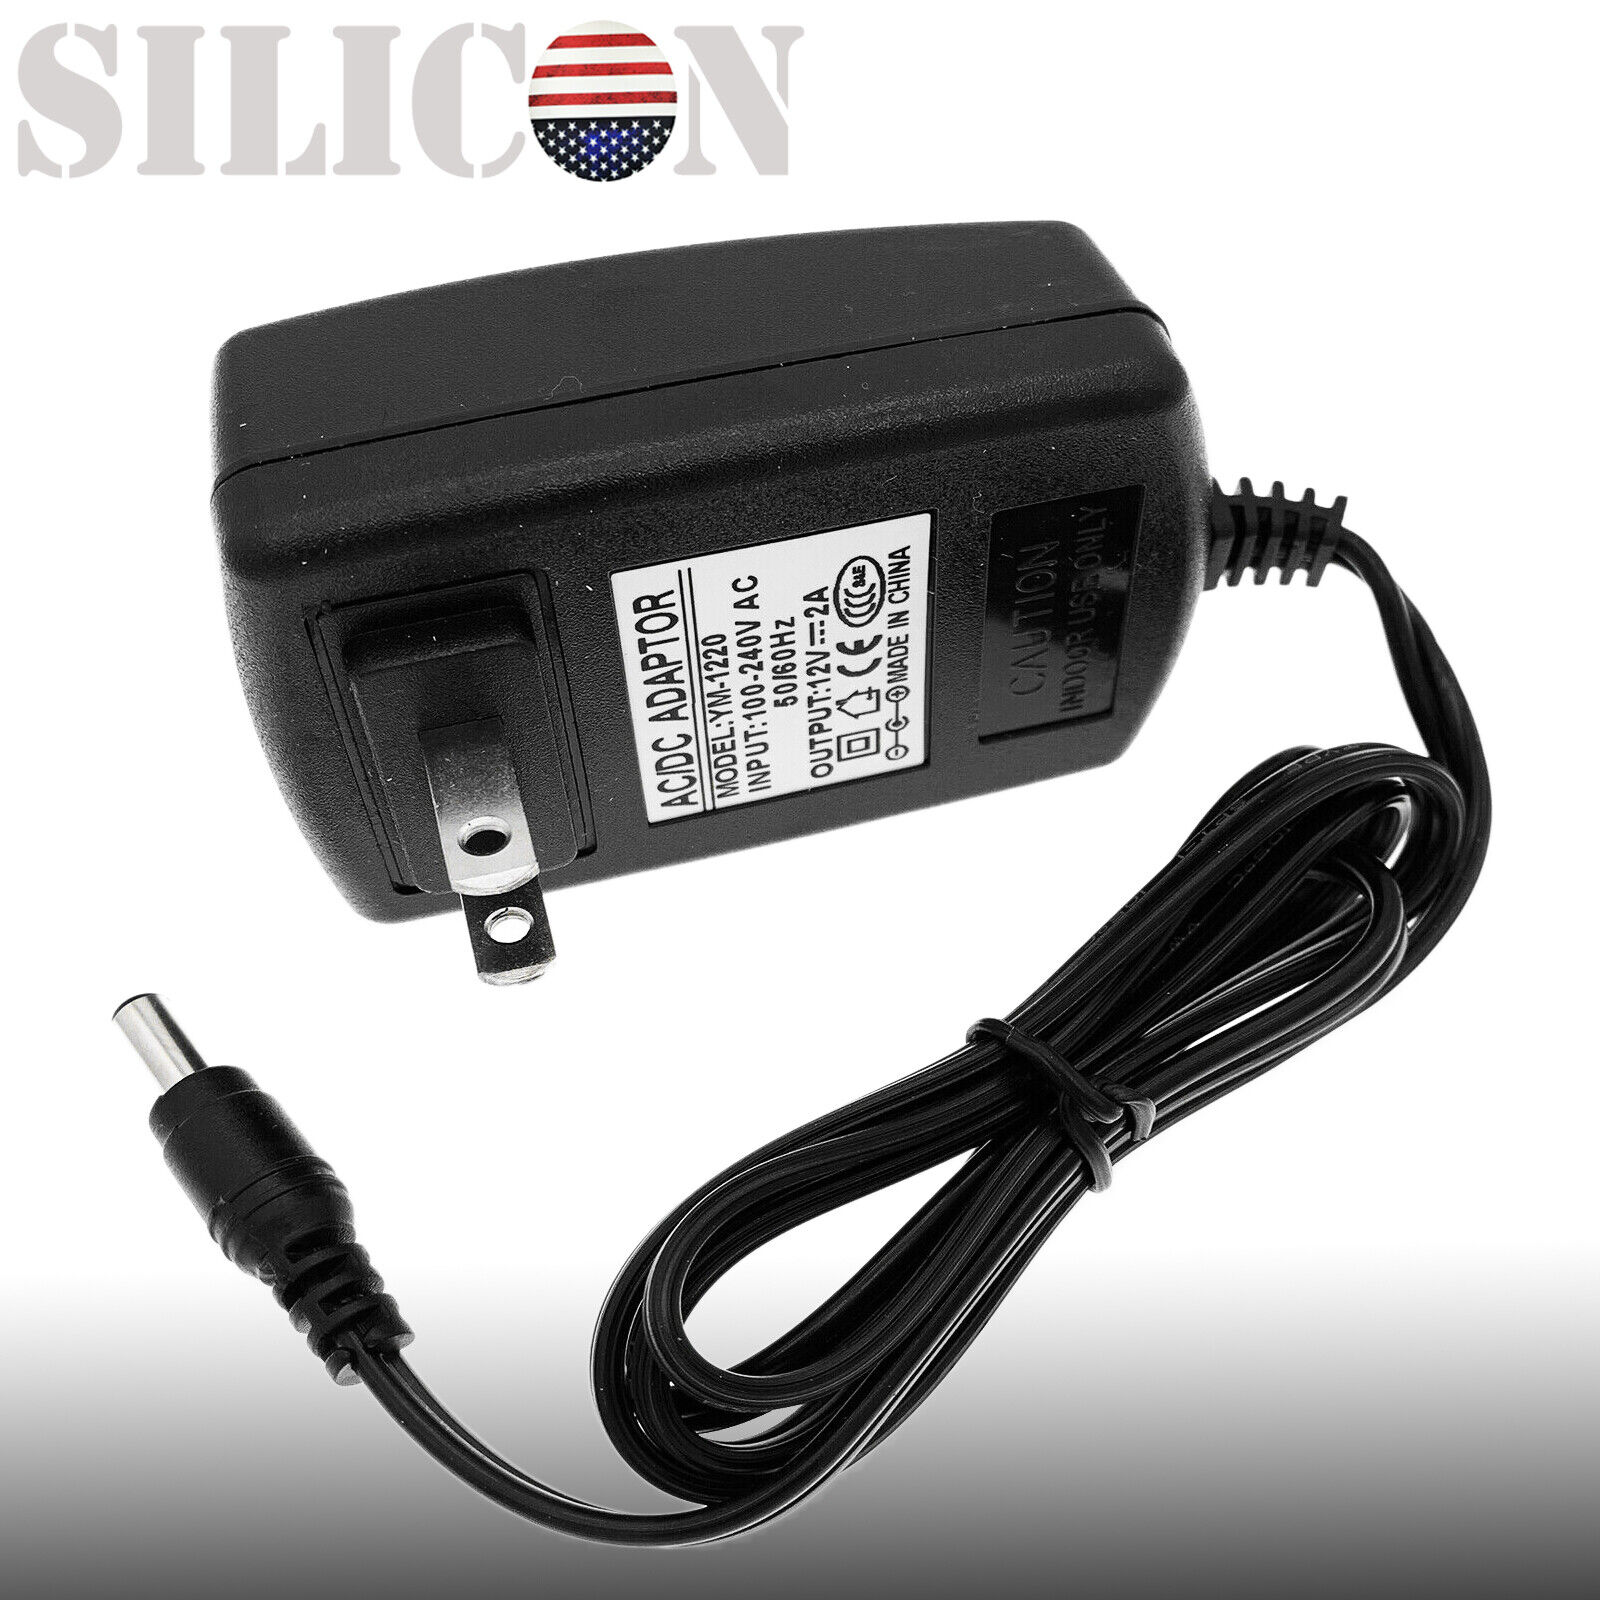 New AC 100-240V To DC 12V 2A Adapter Switching Power Supply Charger Converter US